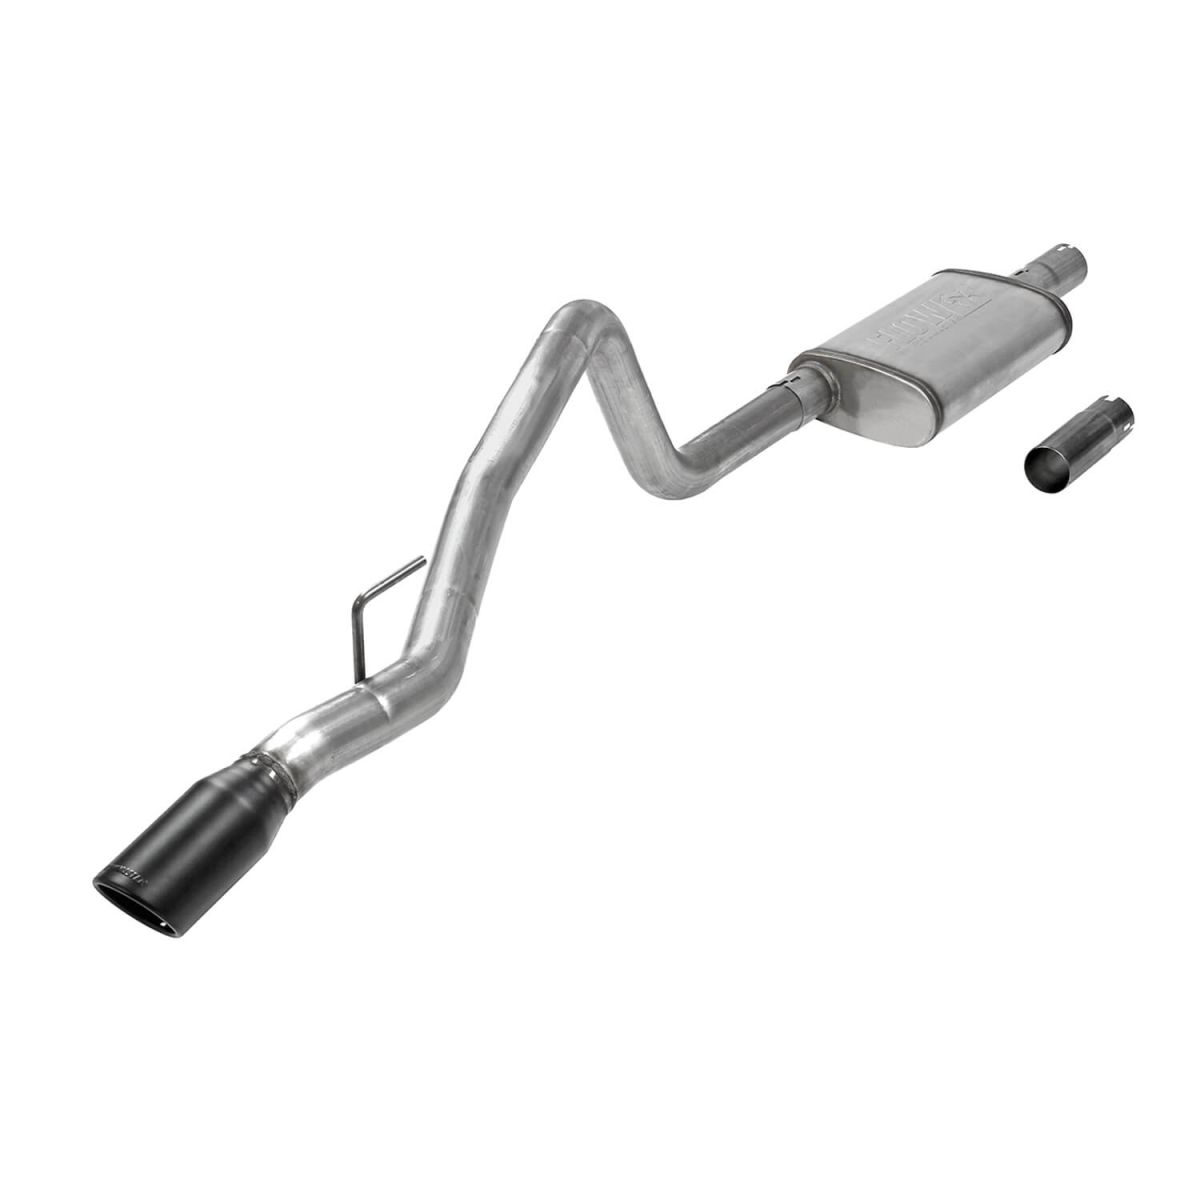 Flowmaster - Flowmaster FlowFX Cat-Back Exhaust Kit For 99-04 Jeep Grand Cherokee 4.0L 4.7L